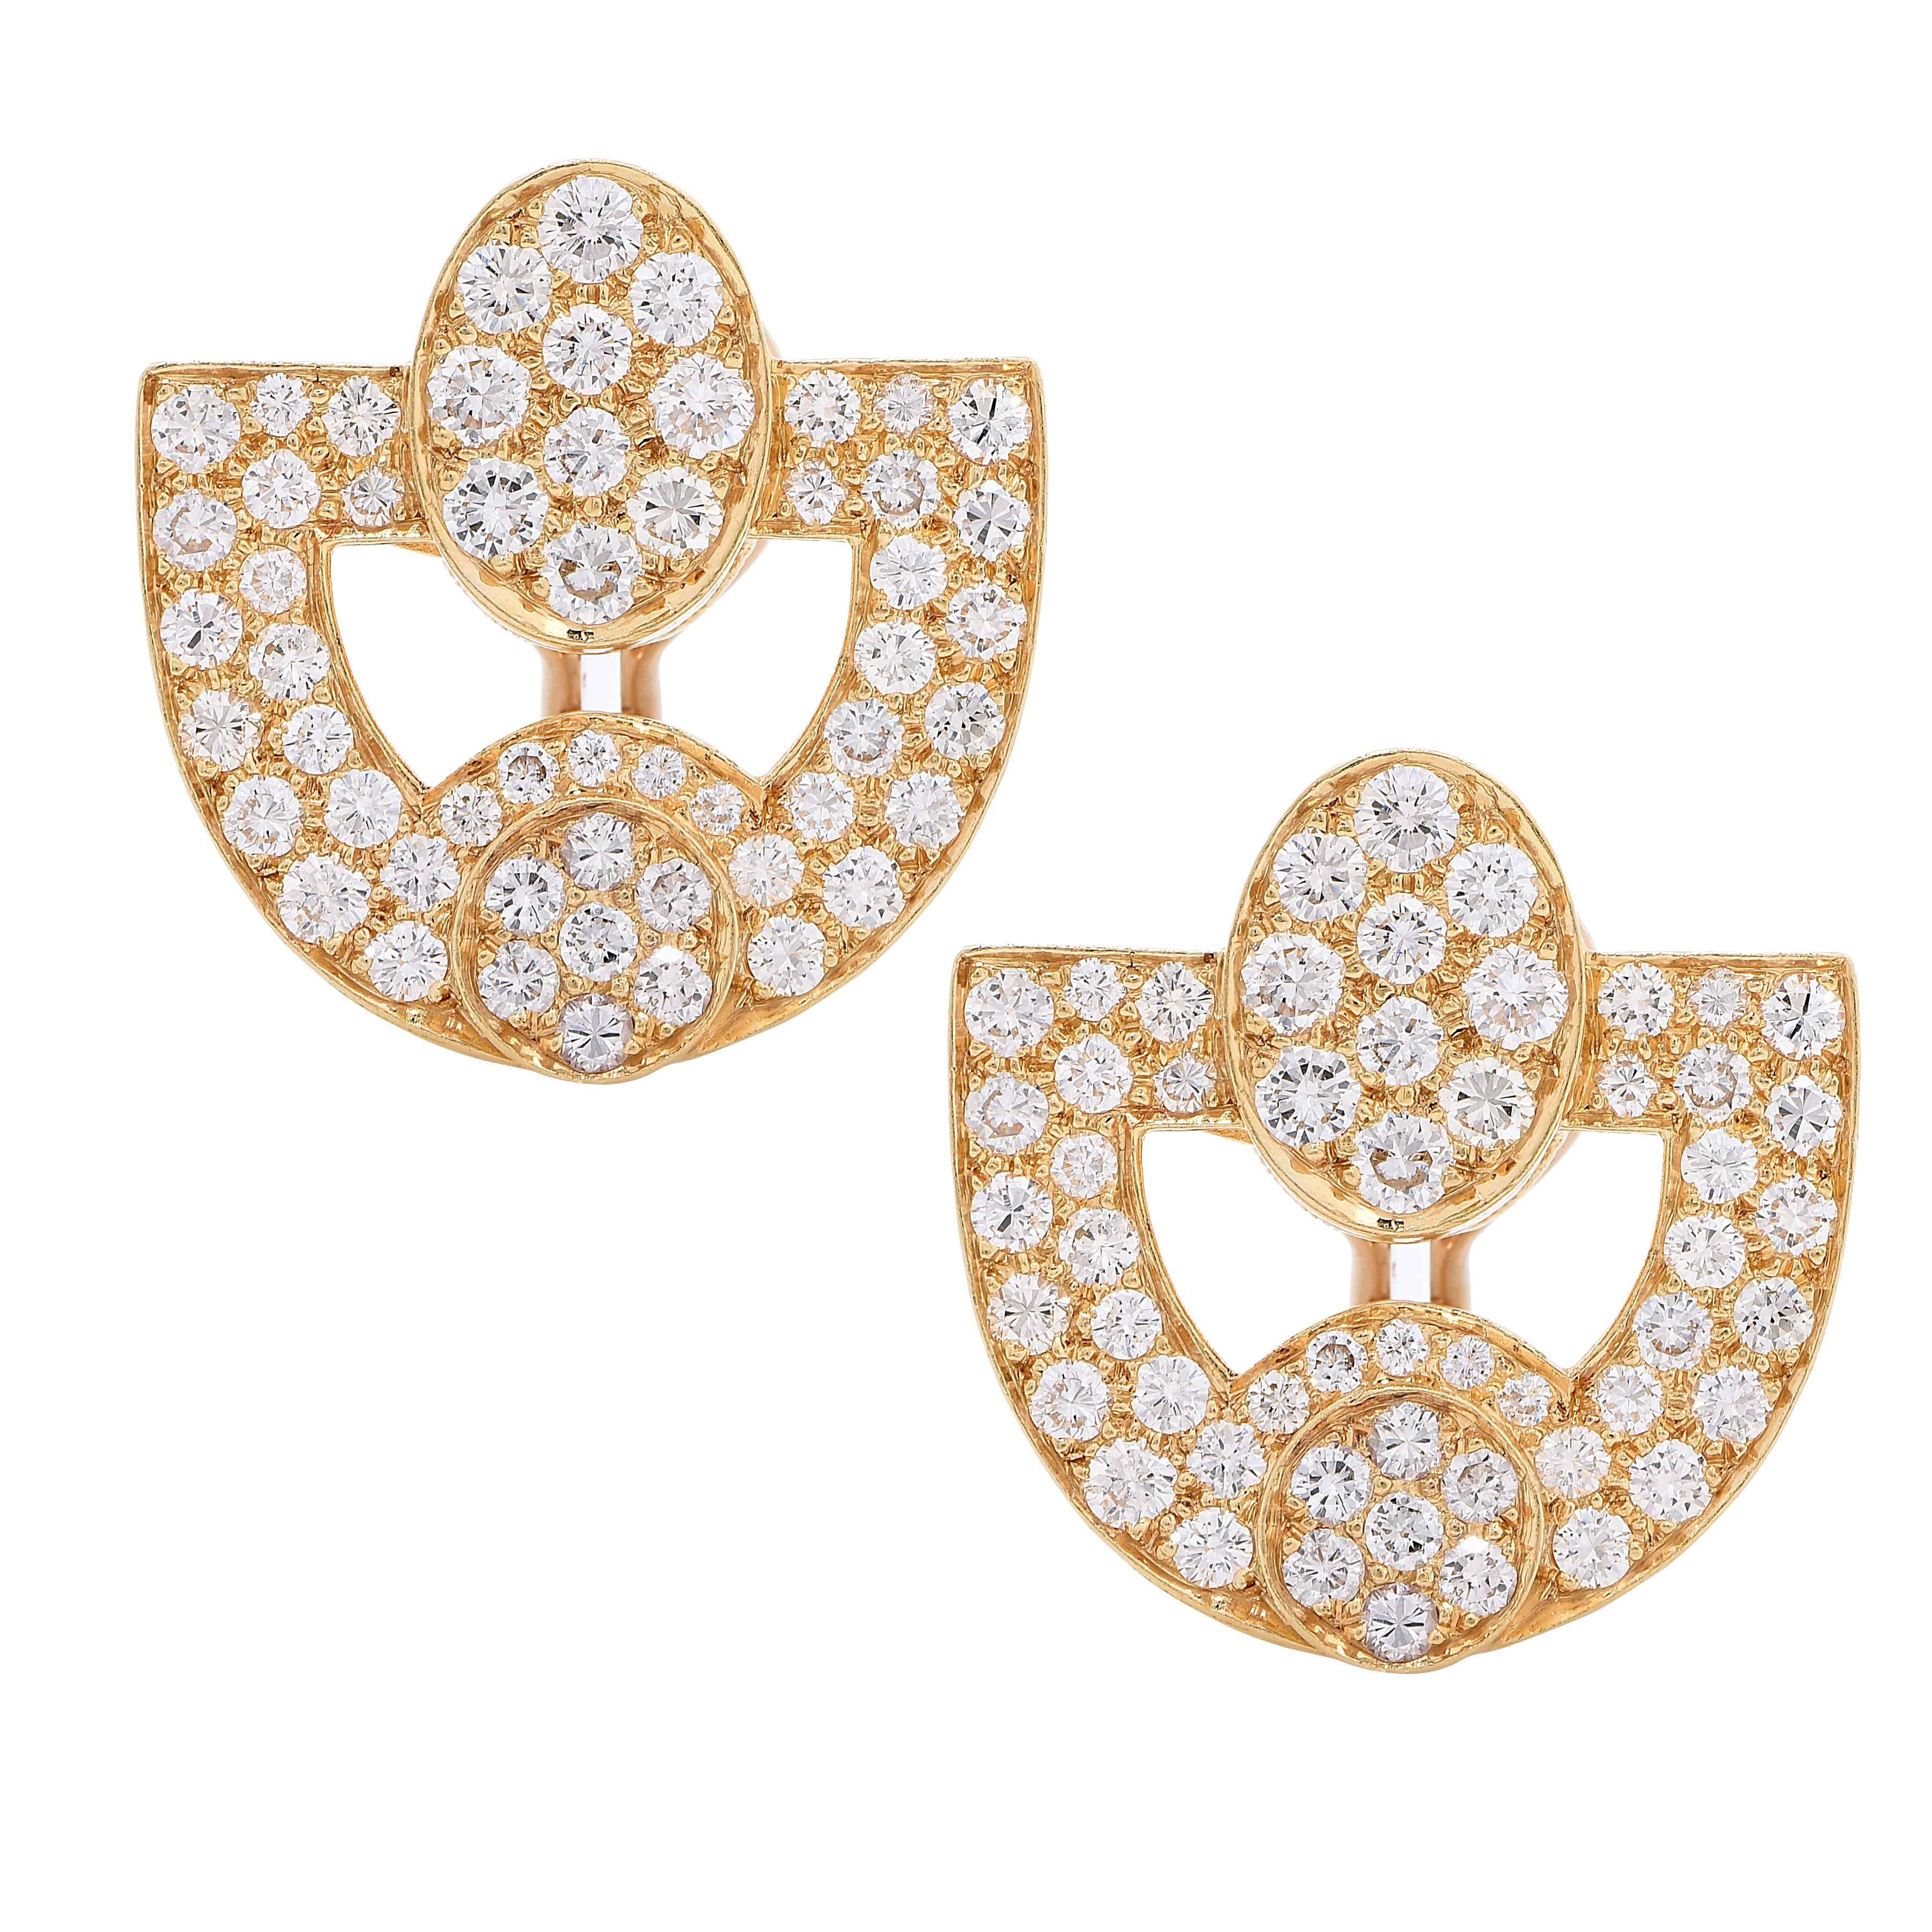 4 Carats Diamonds Yellow Gold Earrings For Sale